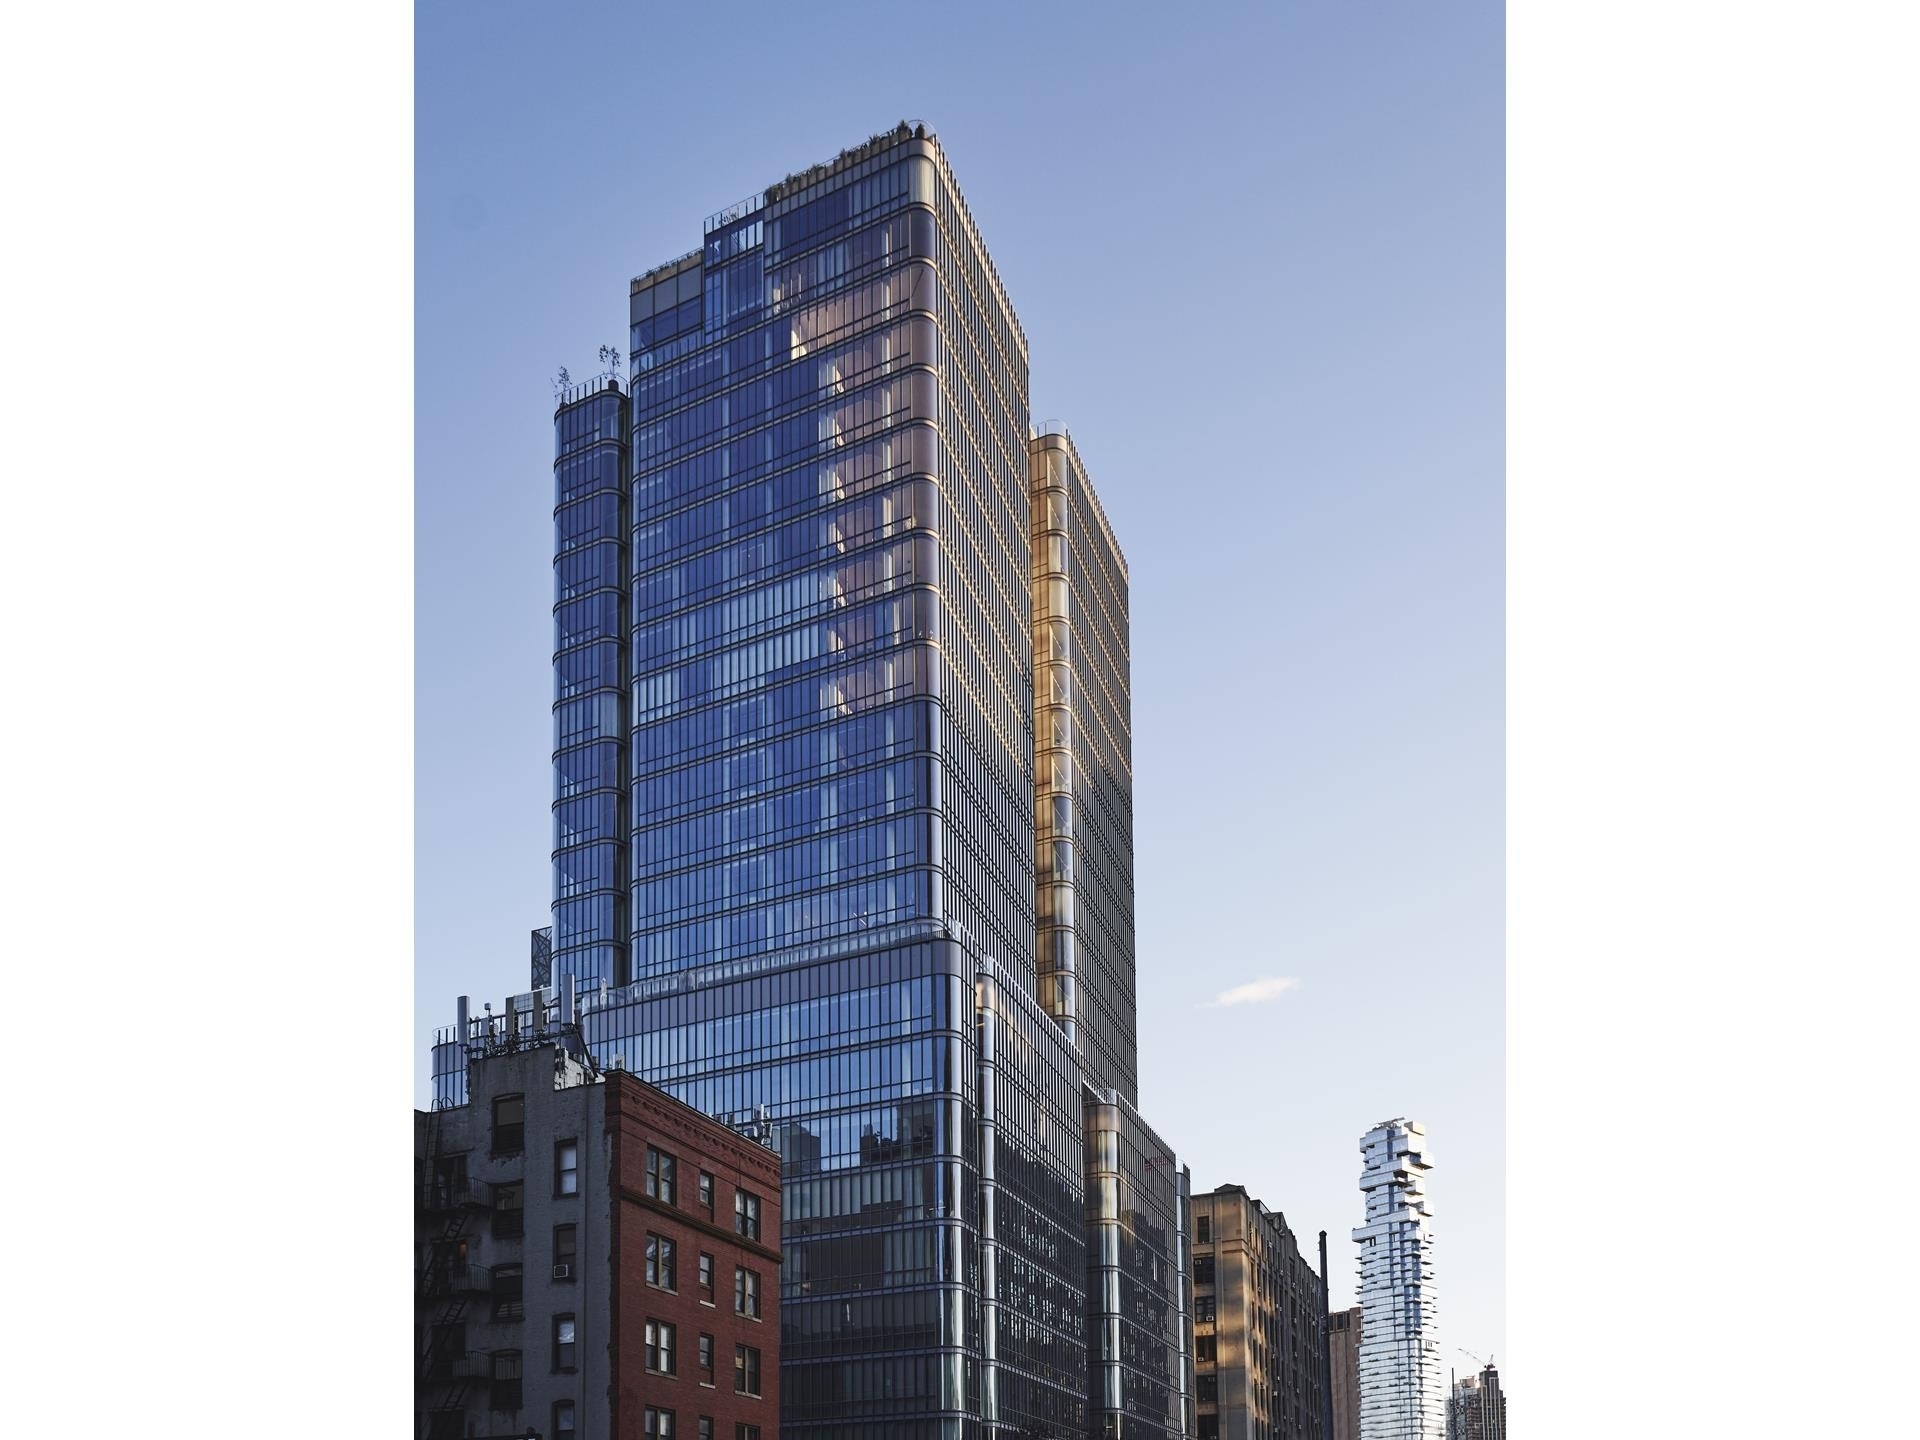 1. Condominiums at 565 BROOME ST, N11E New York